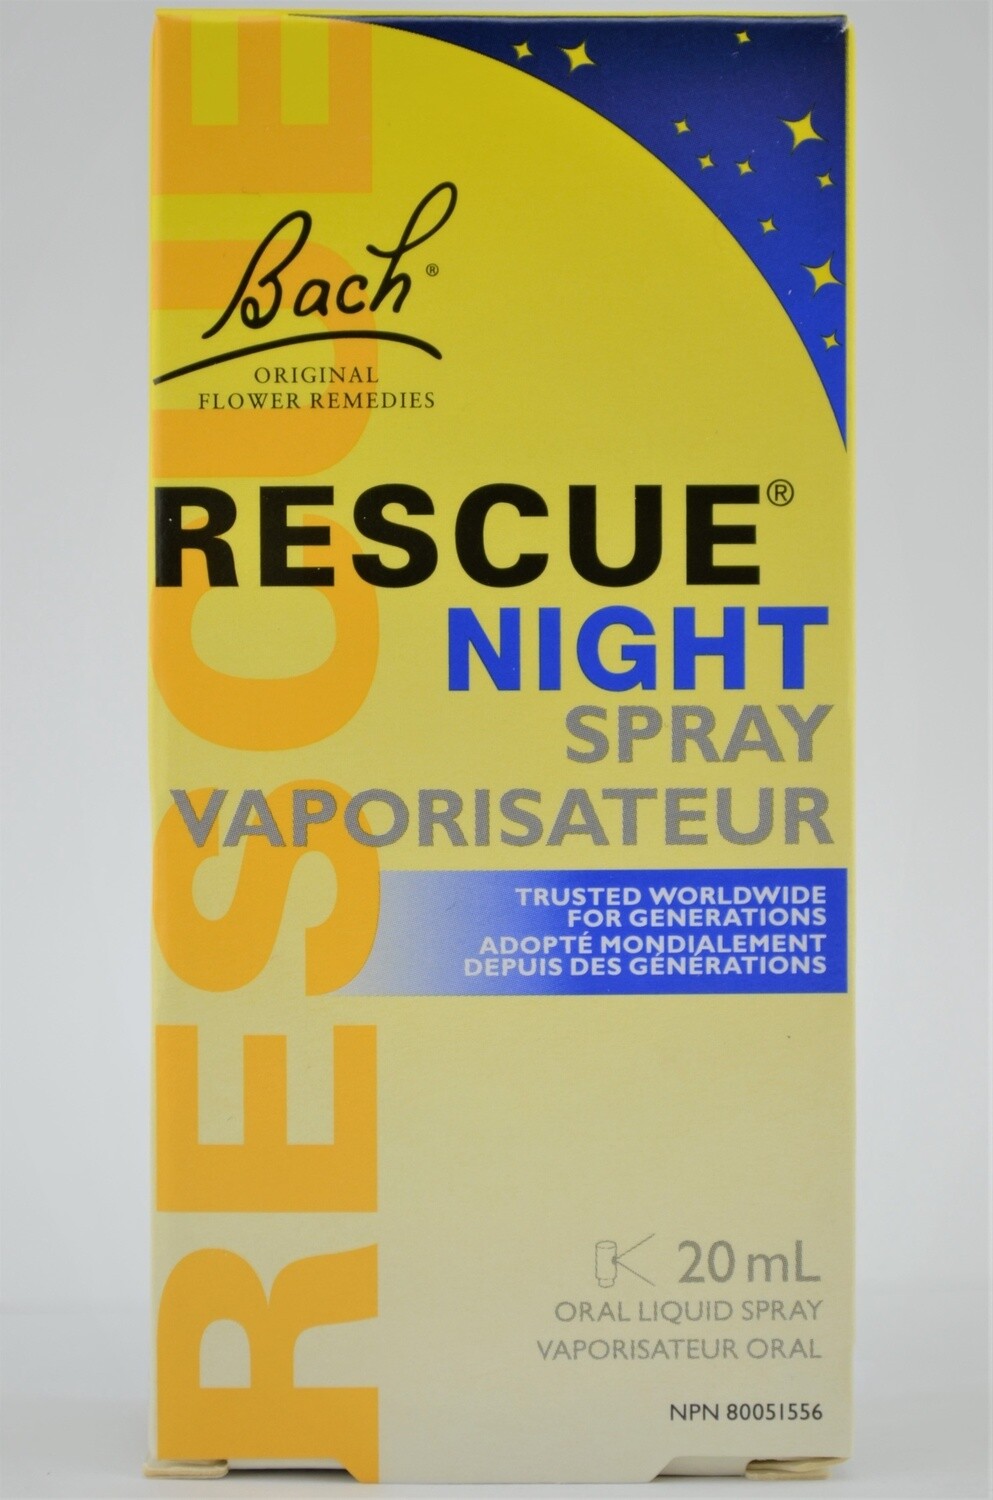 Rescue Remedy Nuit, 20ml